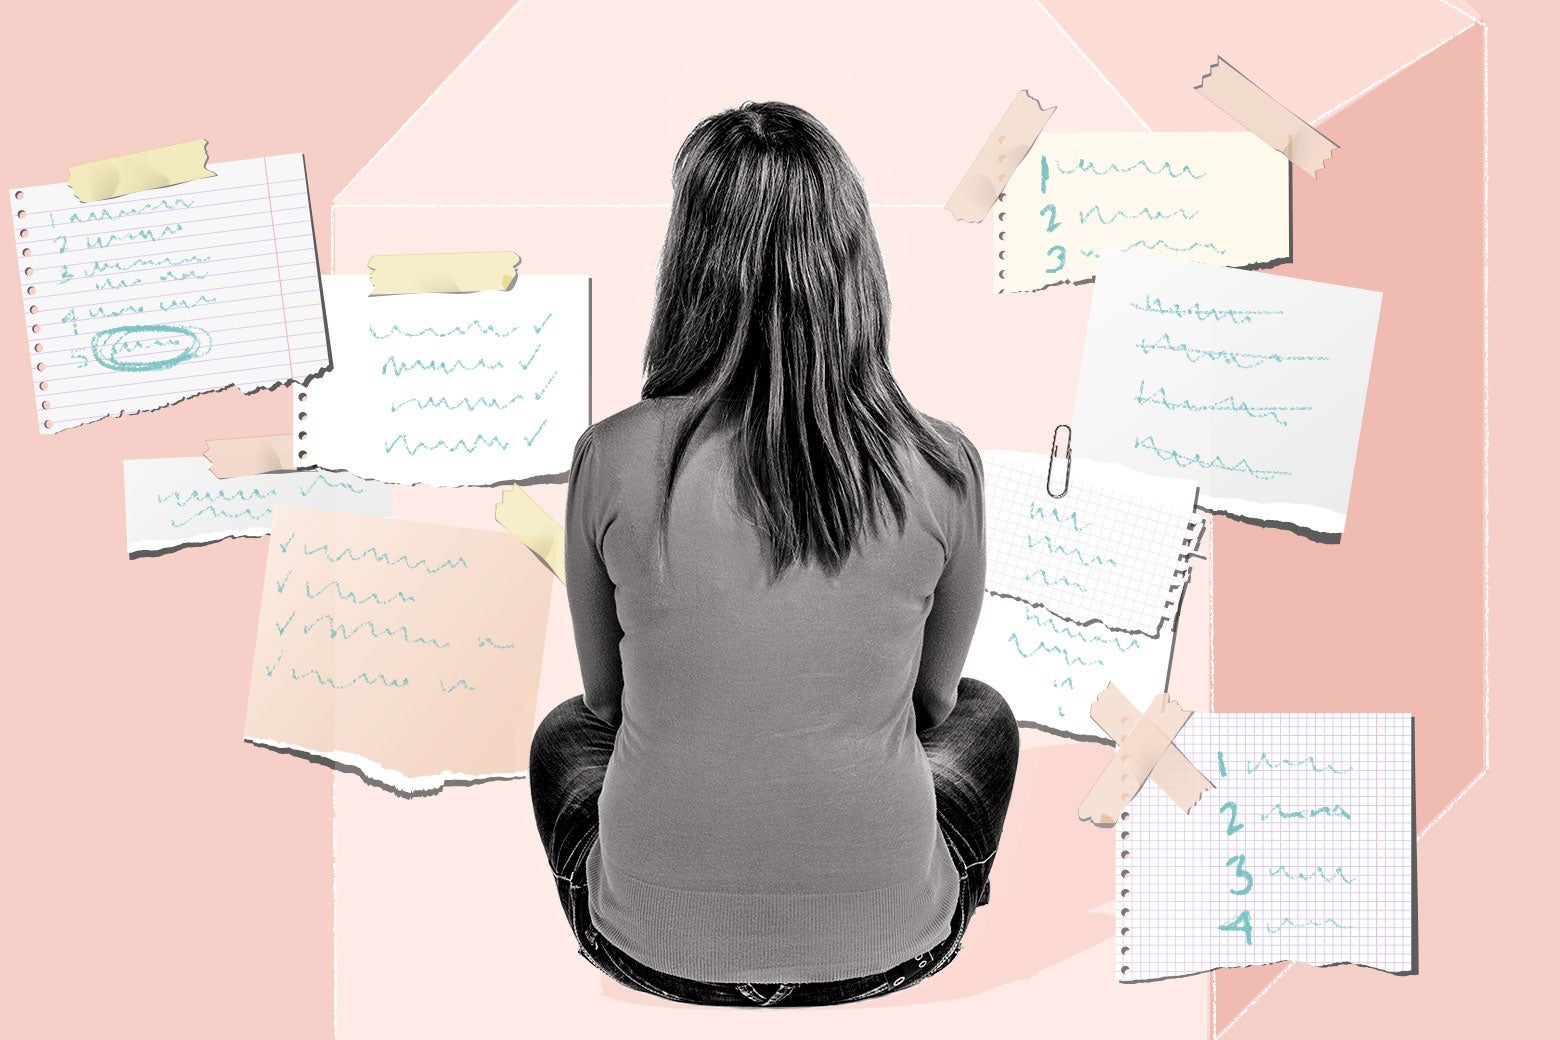 A woman sits alone amid many lists and papers.